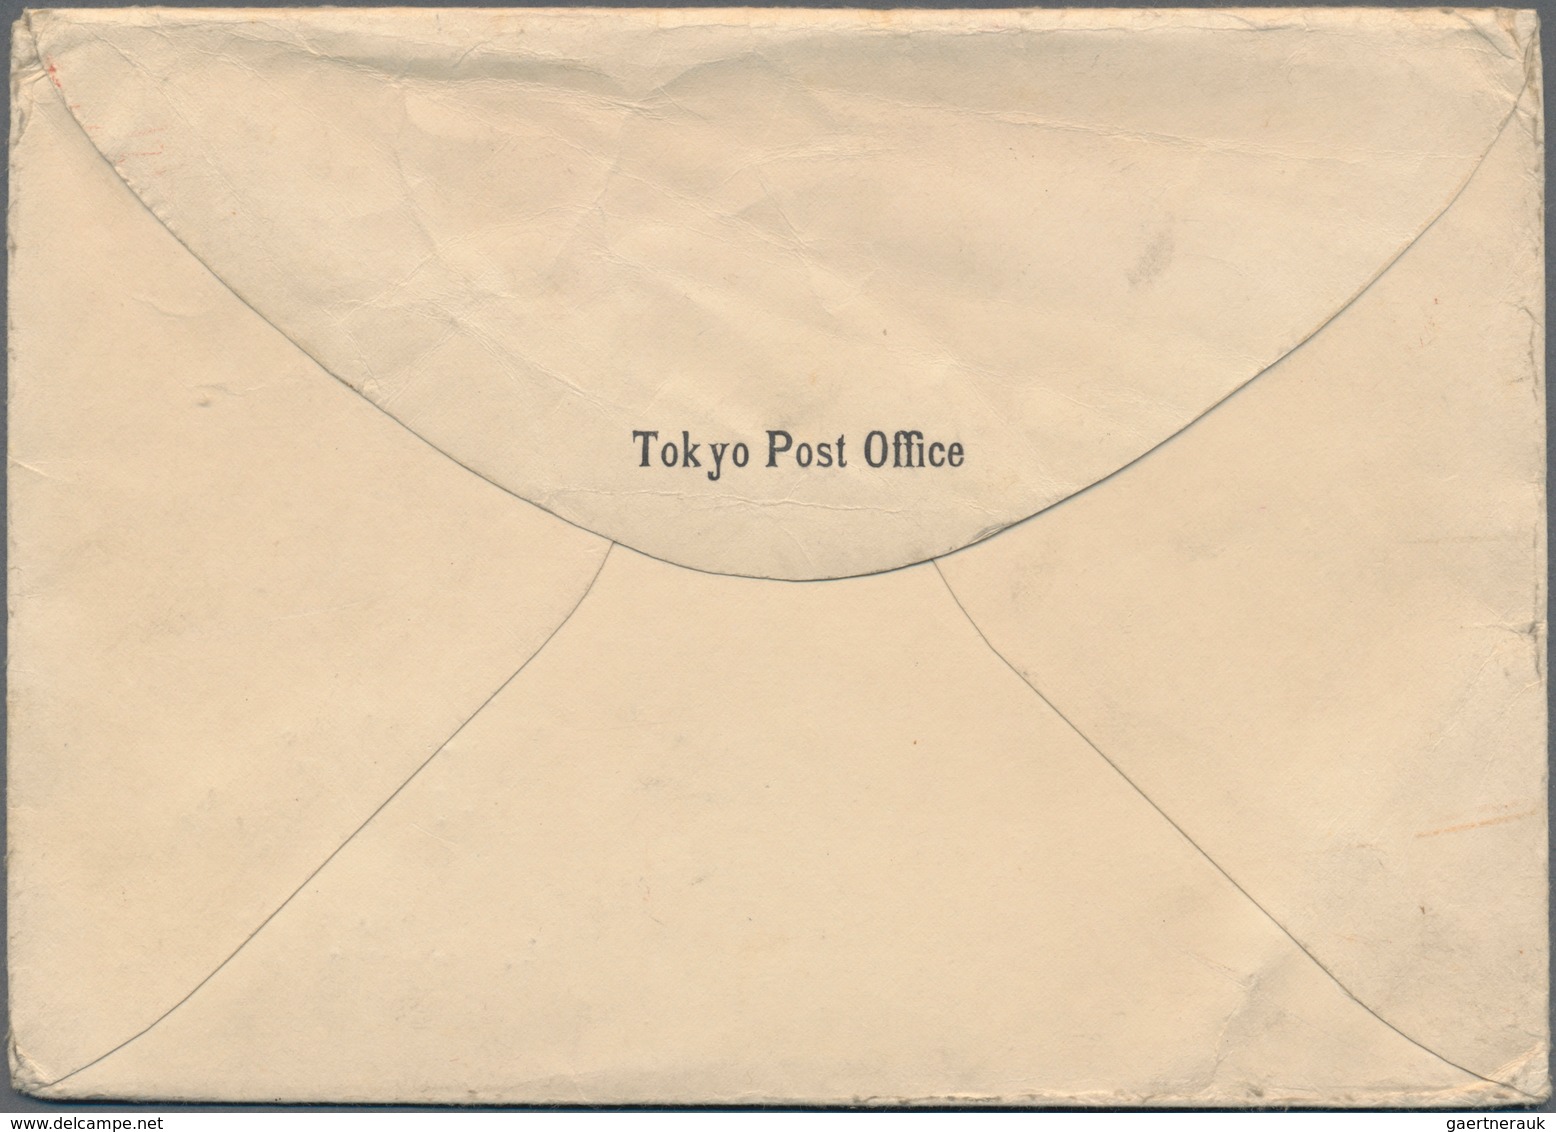 08988 Japan: 1904/40, ppc (4) and printed matter envelope (1, by Tokyo post office) all used foreign inc.